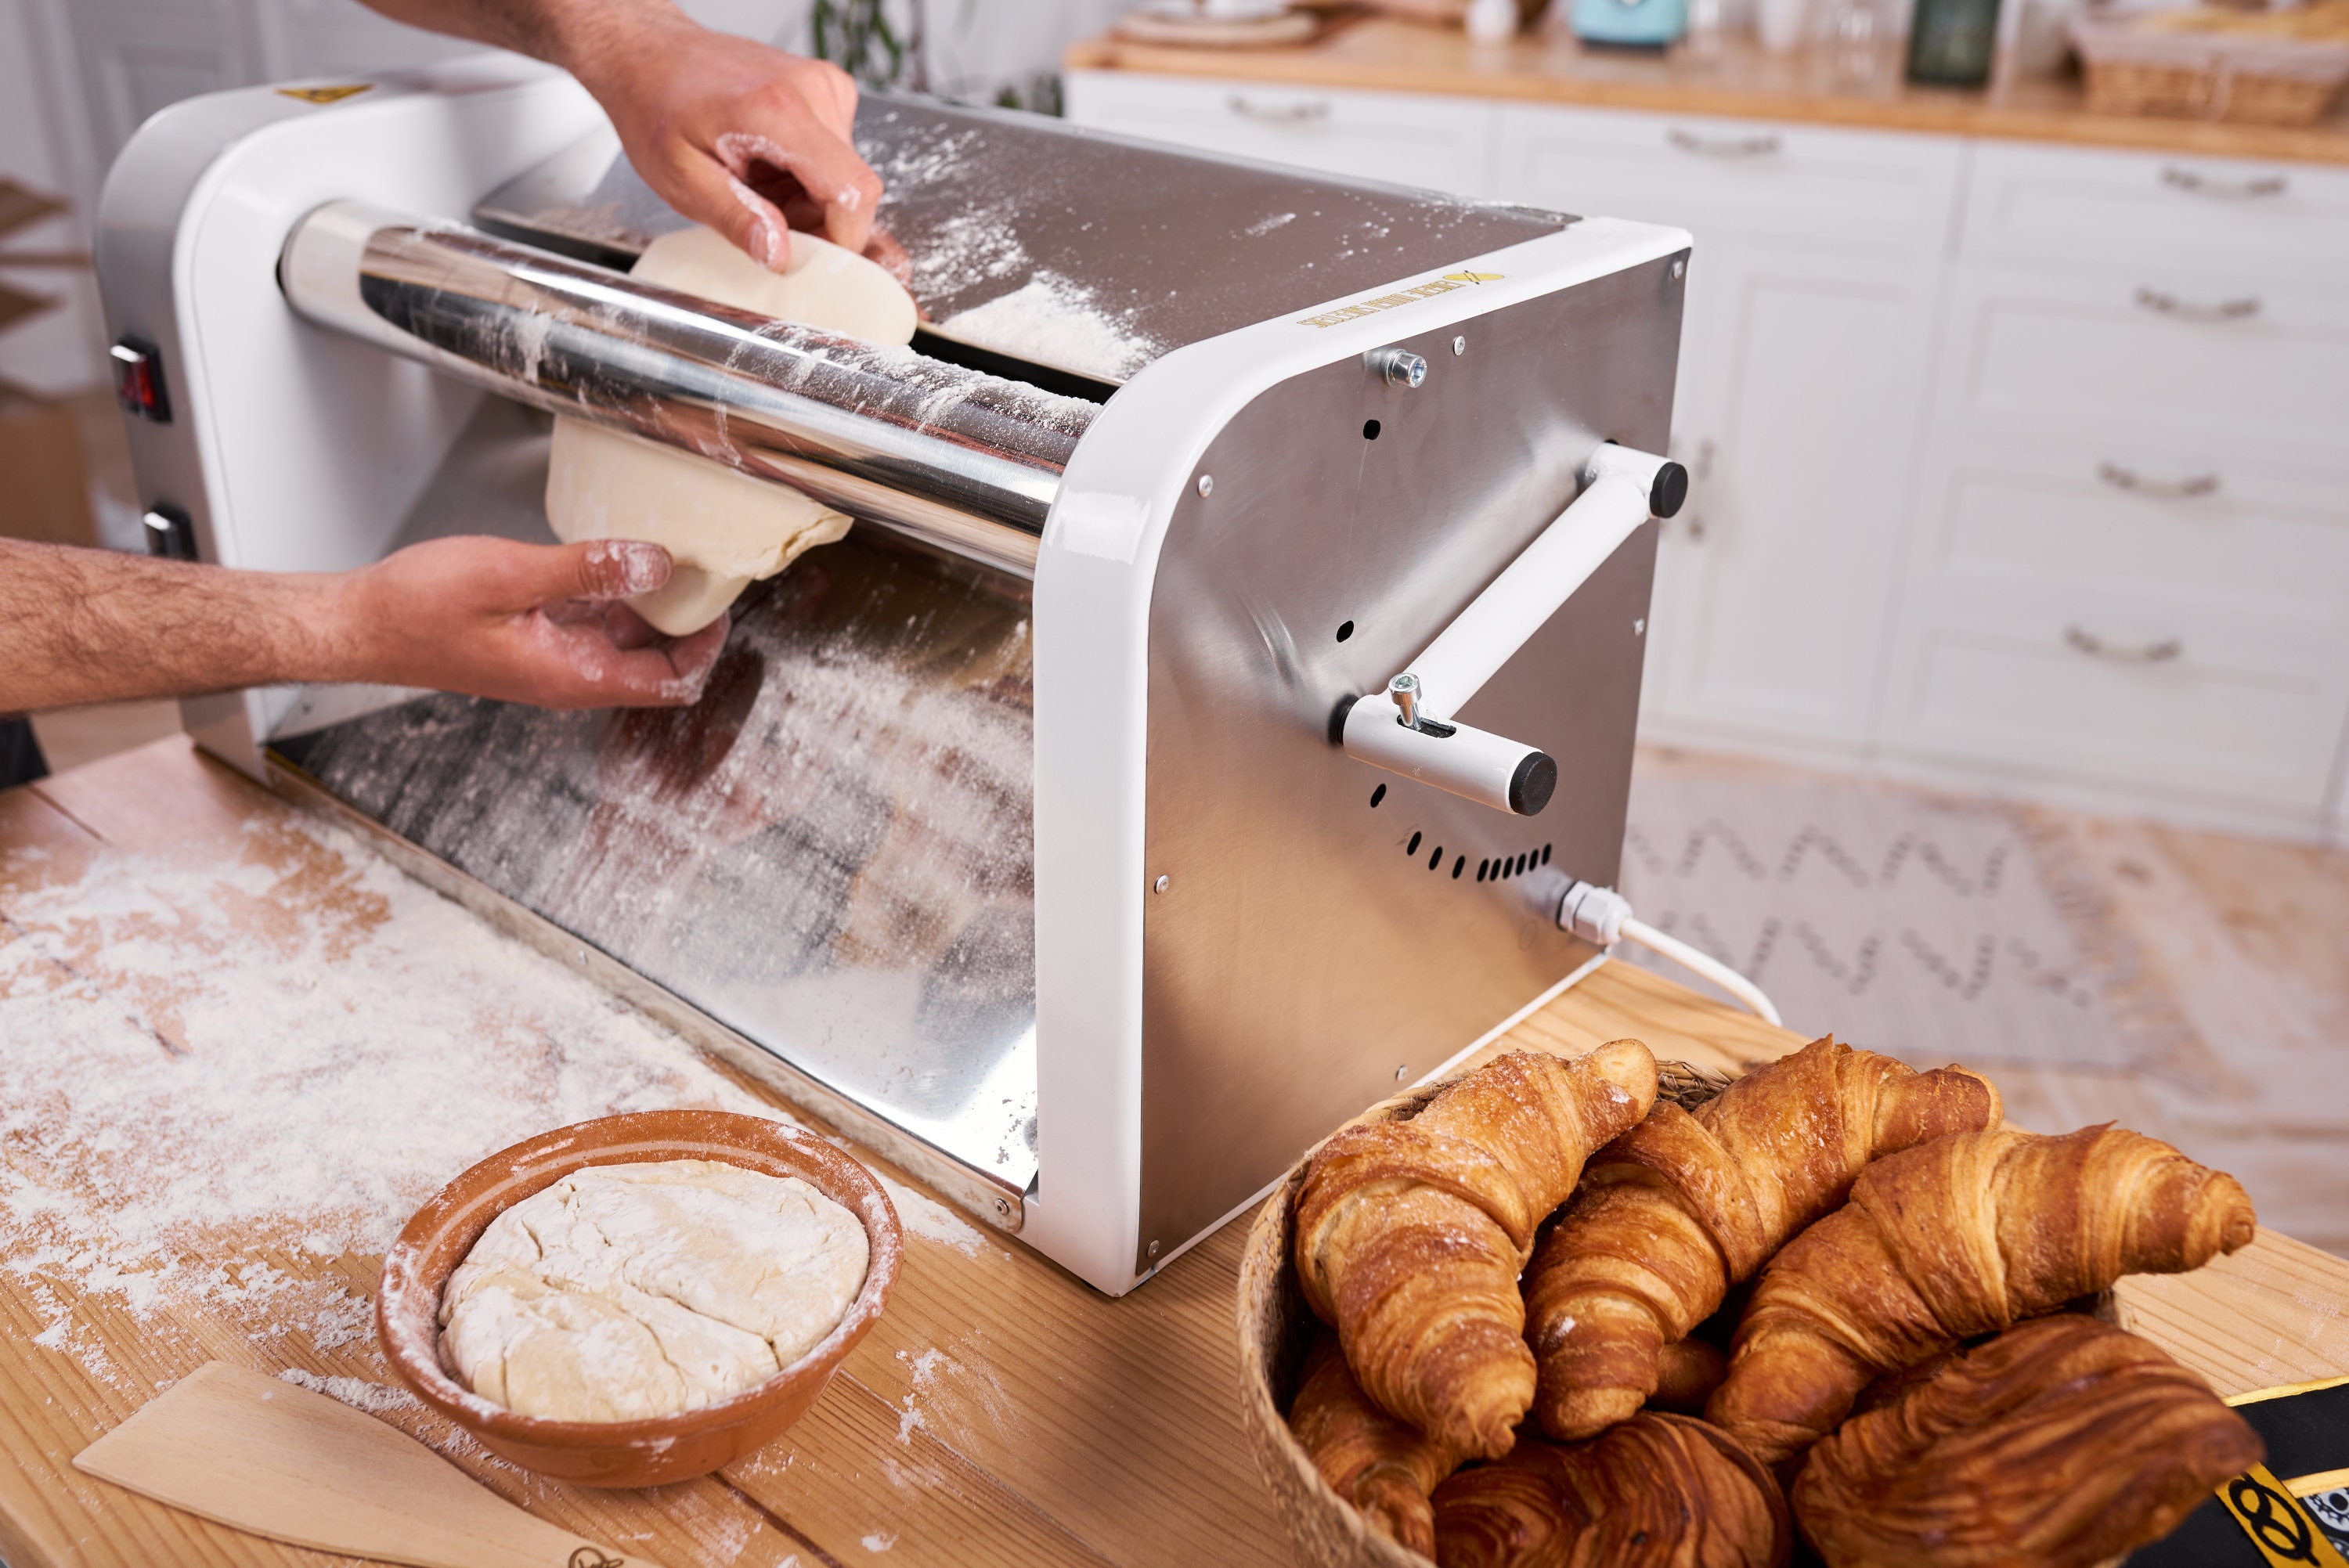 Electric Dough Sheeter Machine for Home Use, Automatic Dough Roller for  Sale, Pasta Pastry Fondant Cookies Sheeter Tool Kitchen Baker Chef 